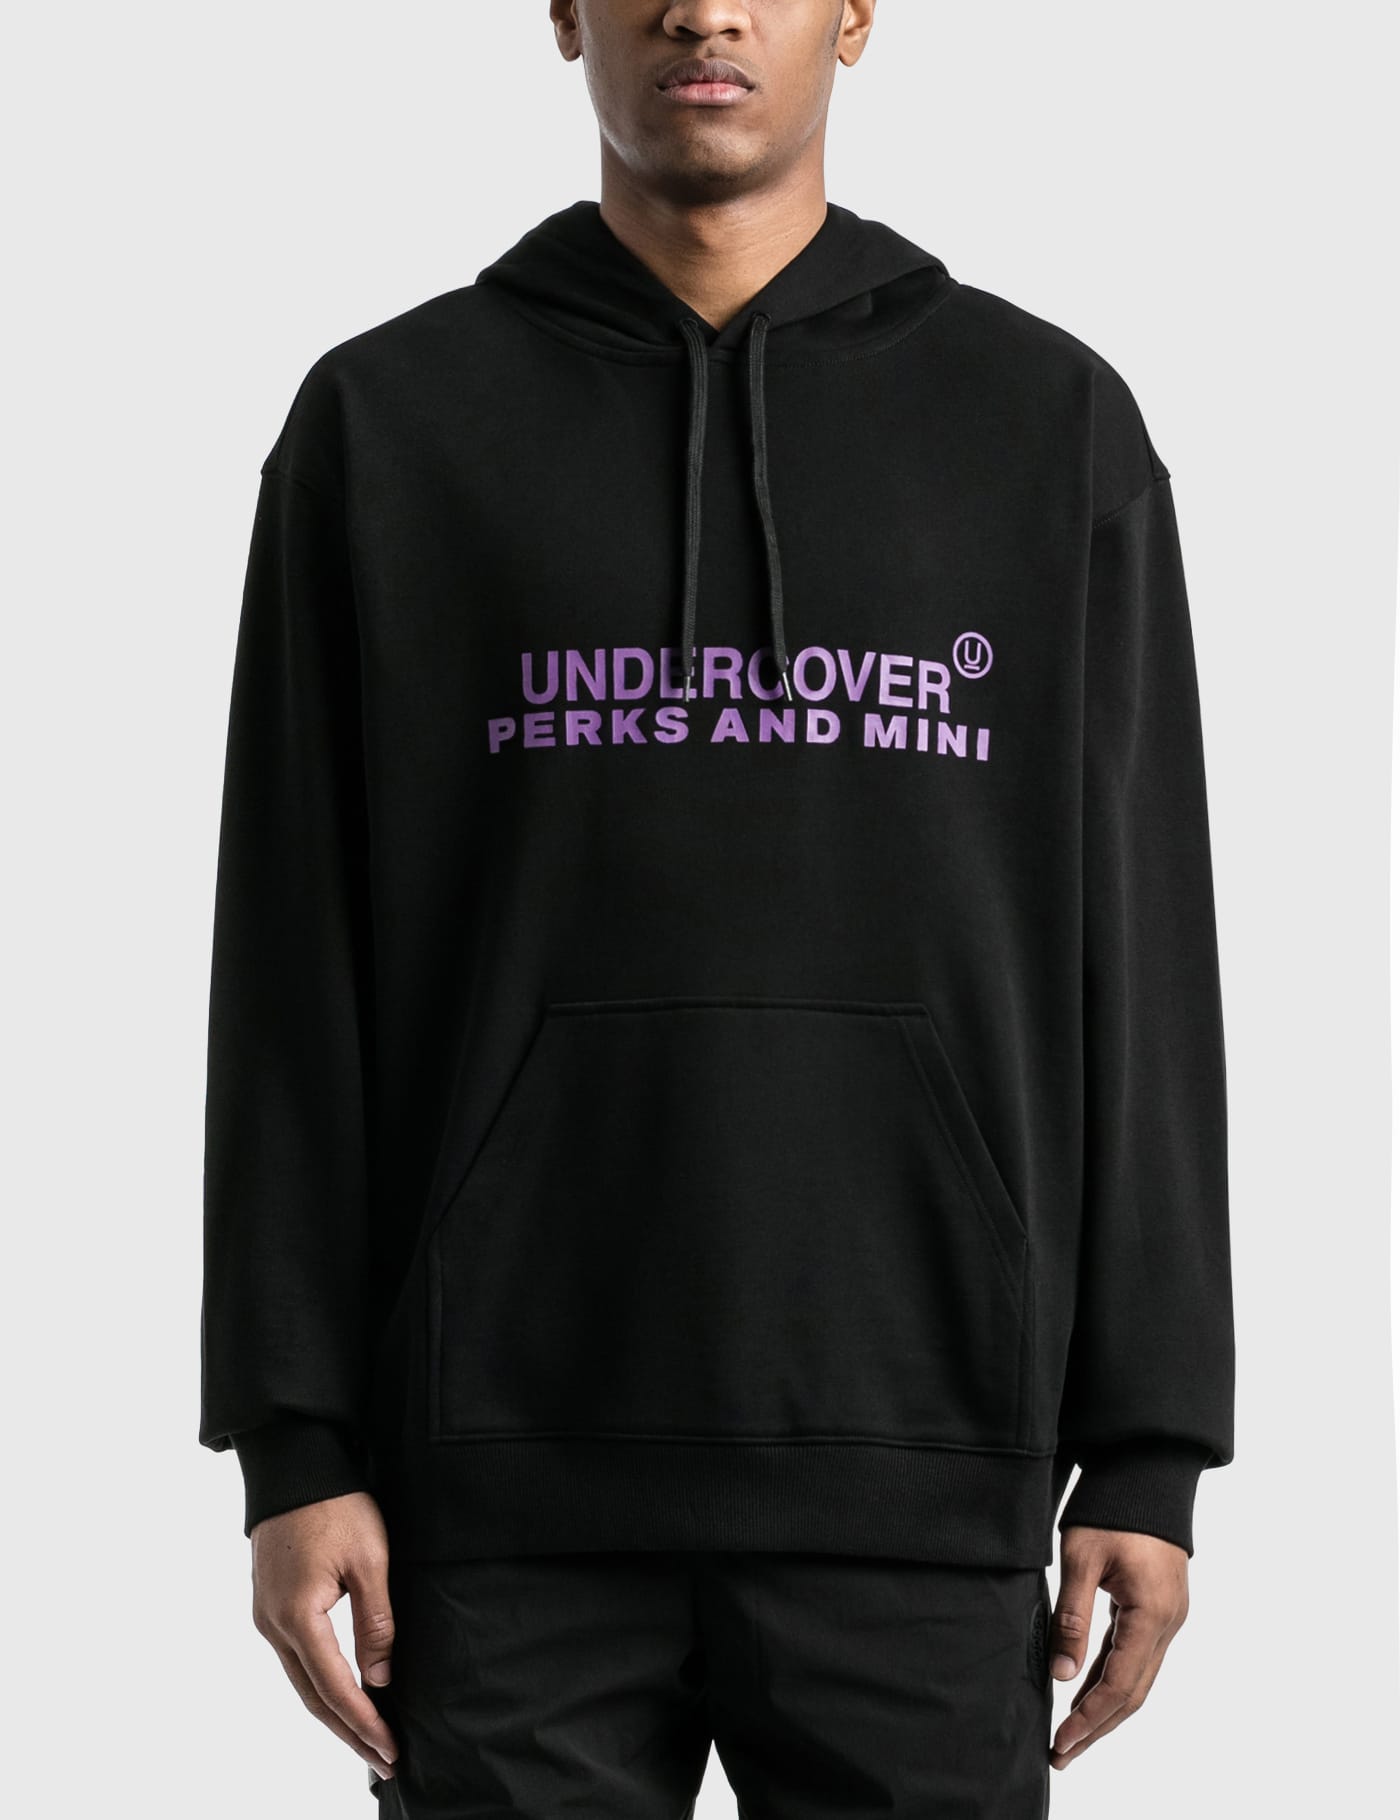 Perks and Mini - P.A.M. x Undercover 2020 Hoodie B | HBX - ハイプ 